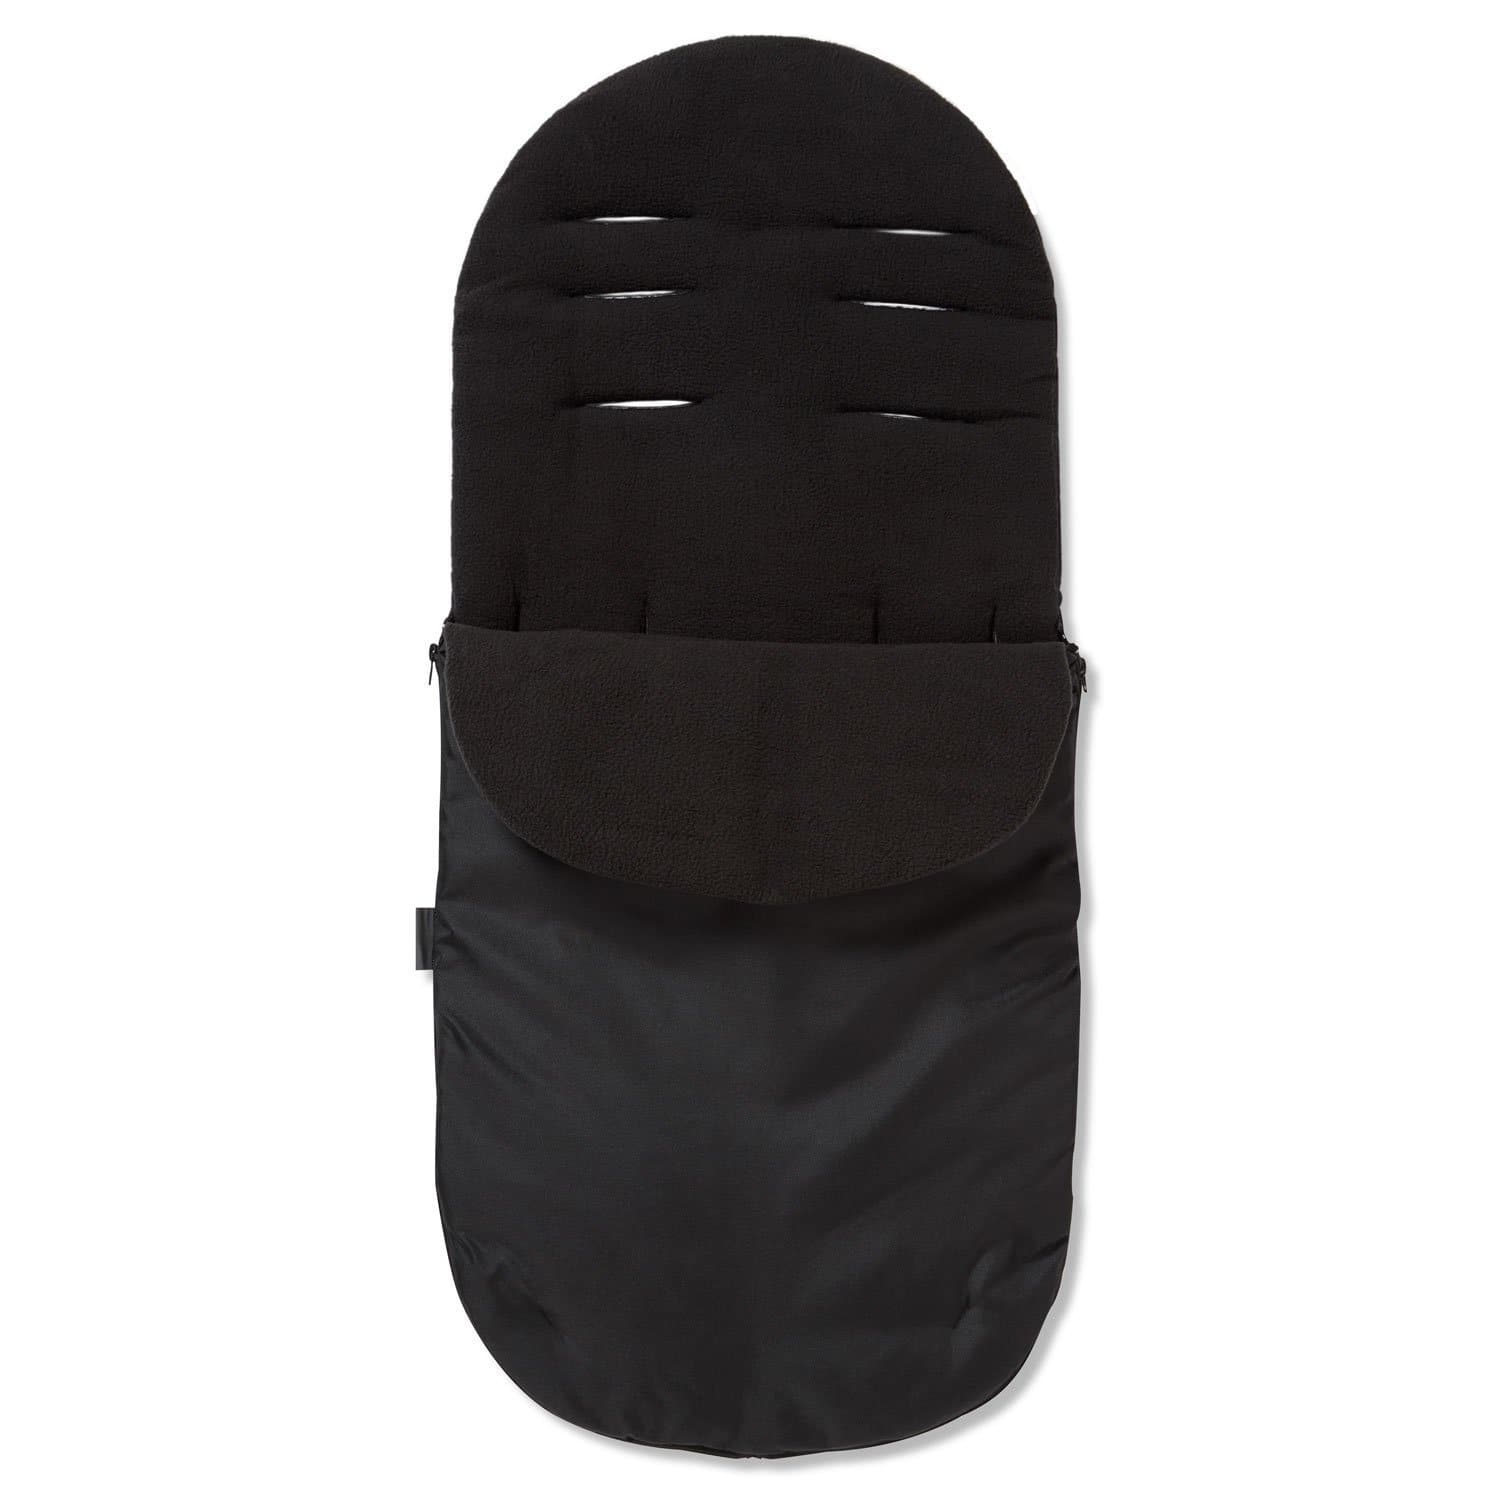 Footmuff / Cosy Toes Compatible with Quinny - Black / Fits All Models | For Your Little One